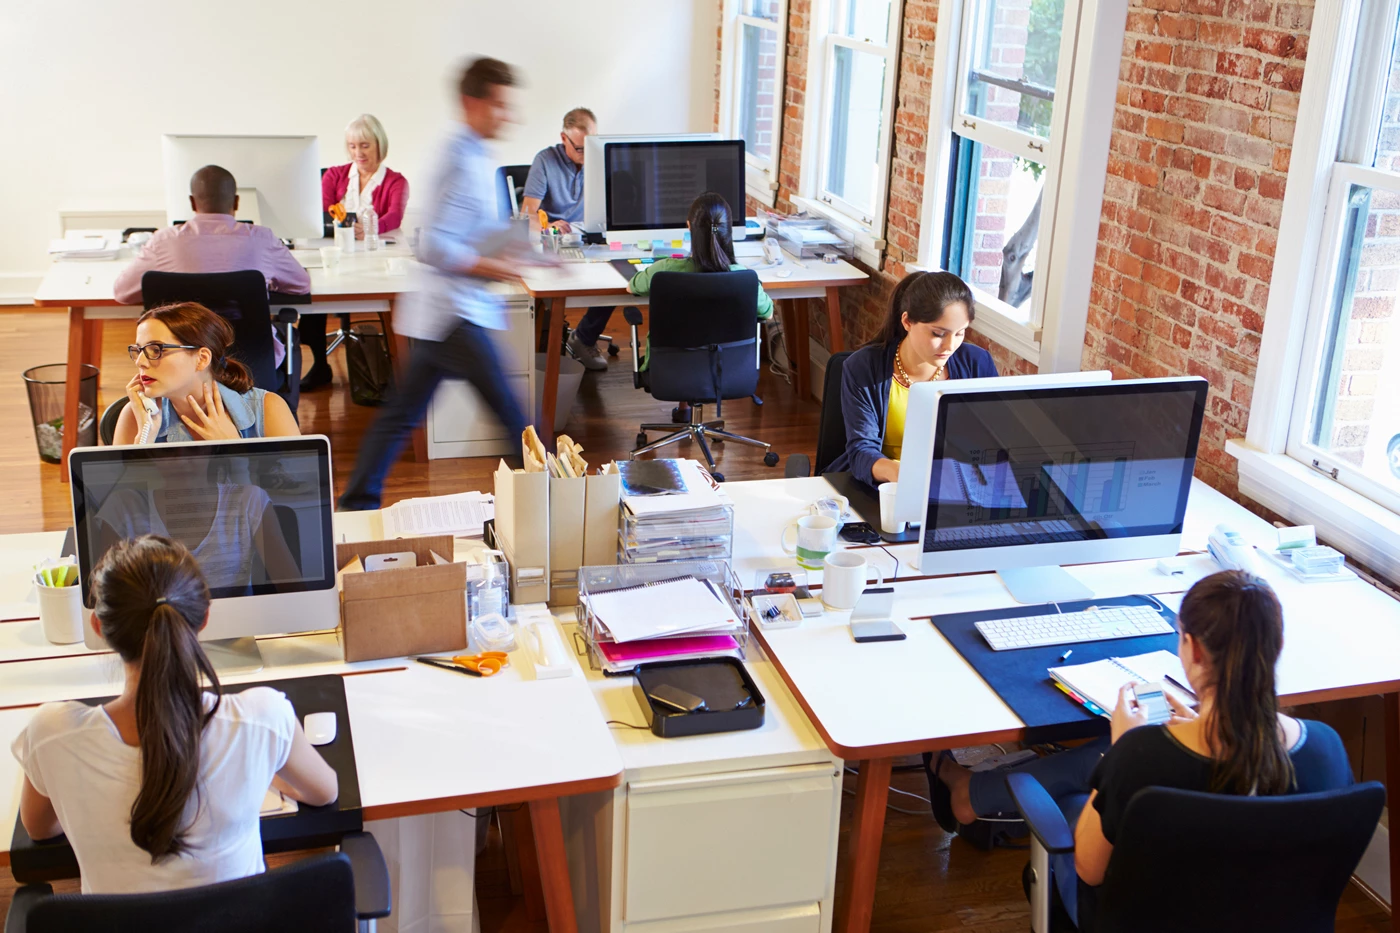 A busy office with workers sitting at their desks and moving around